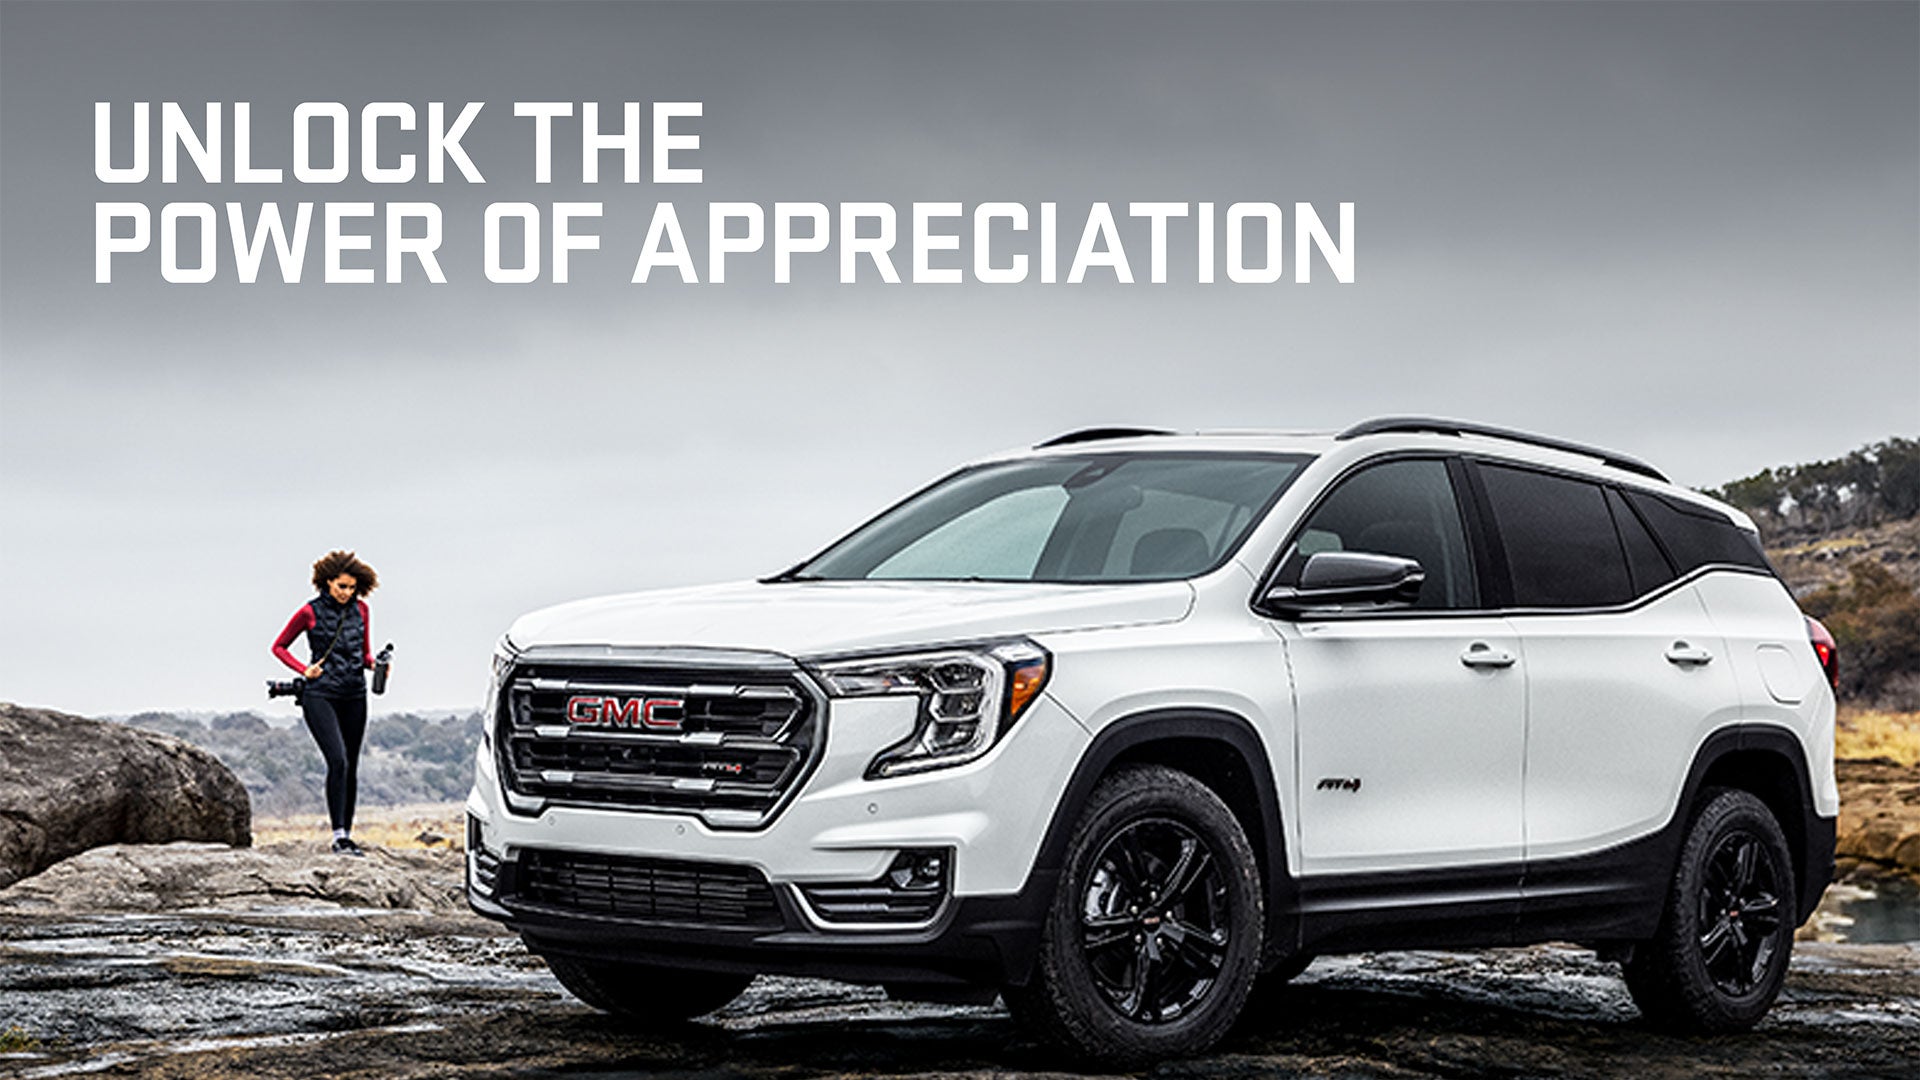 Unlock the power of appreciation | Turner Buick GMC in New Holland PA